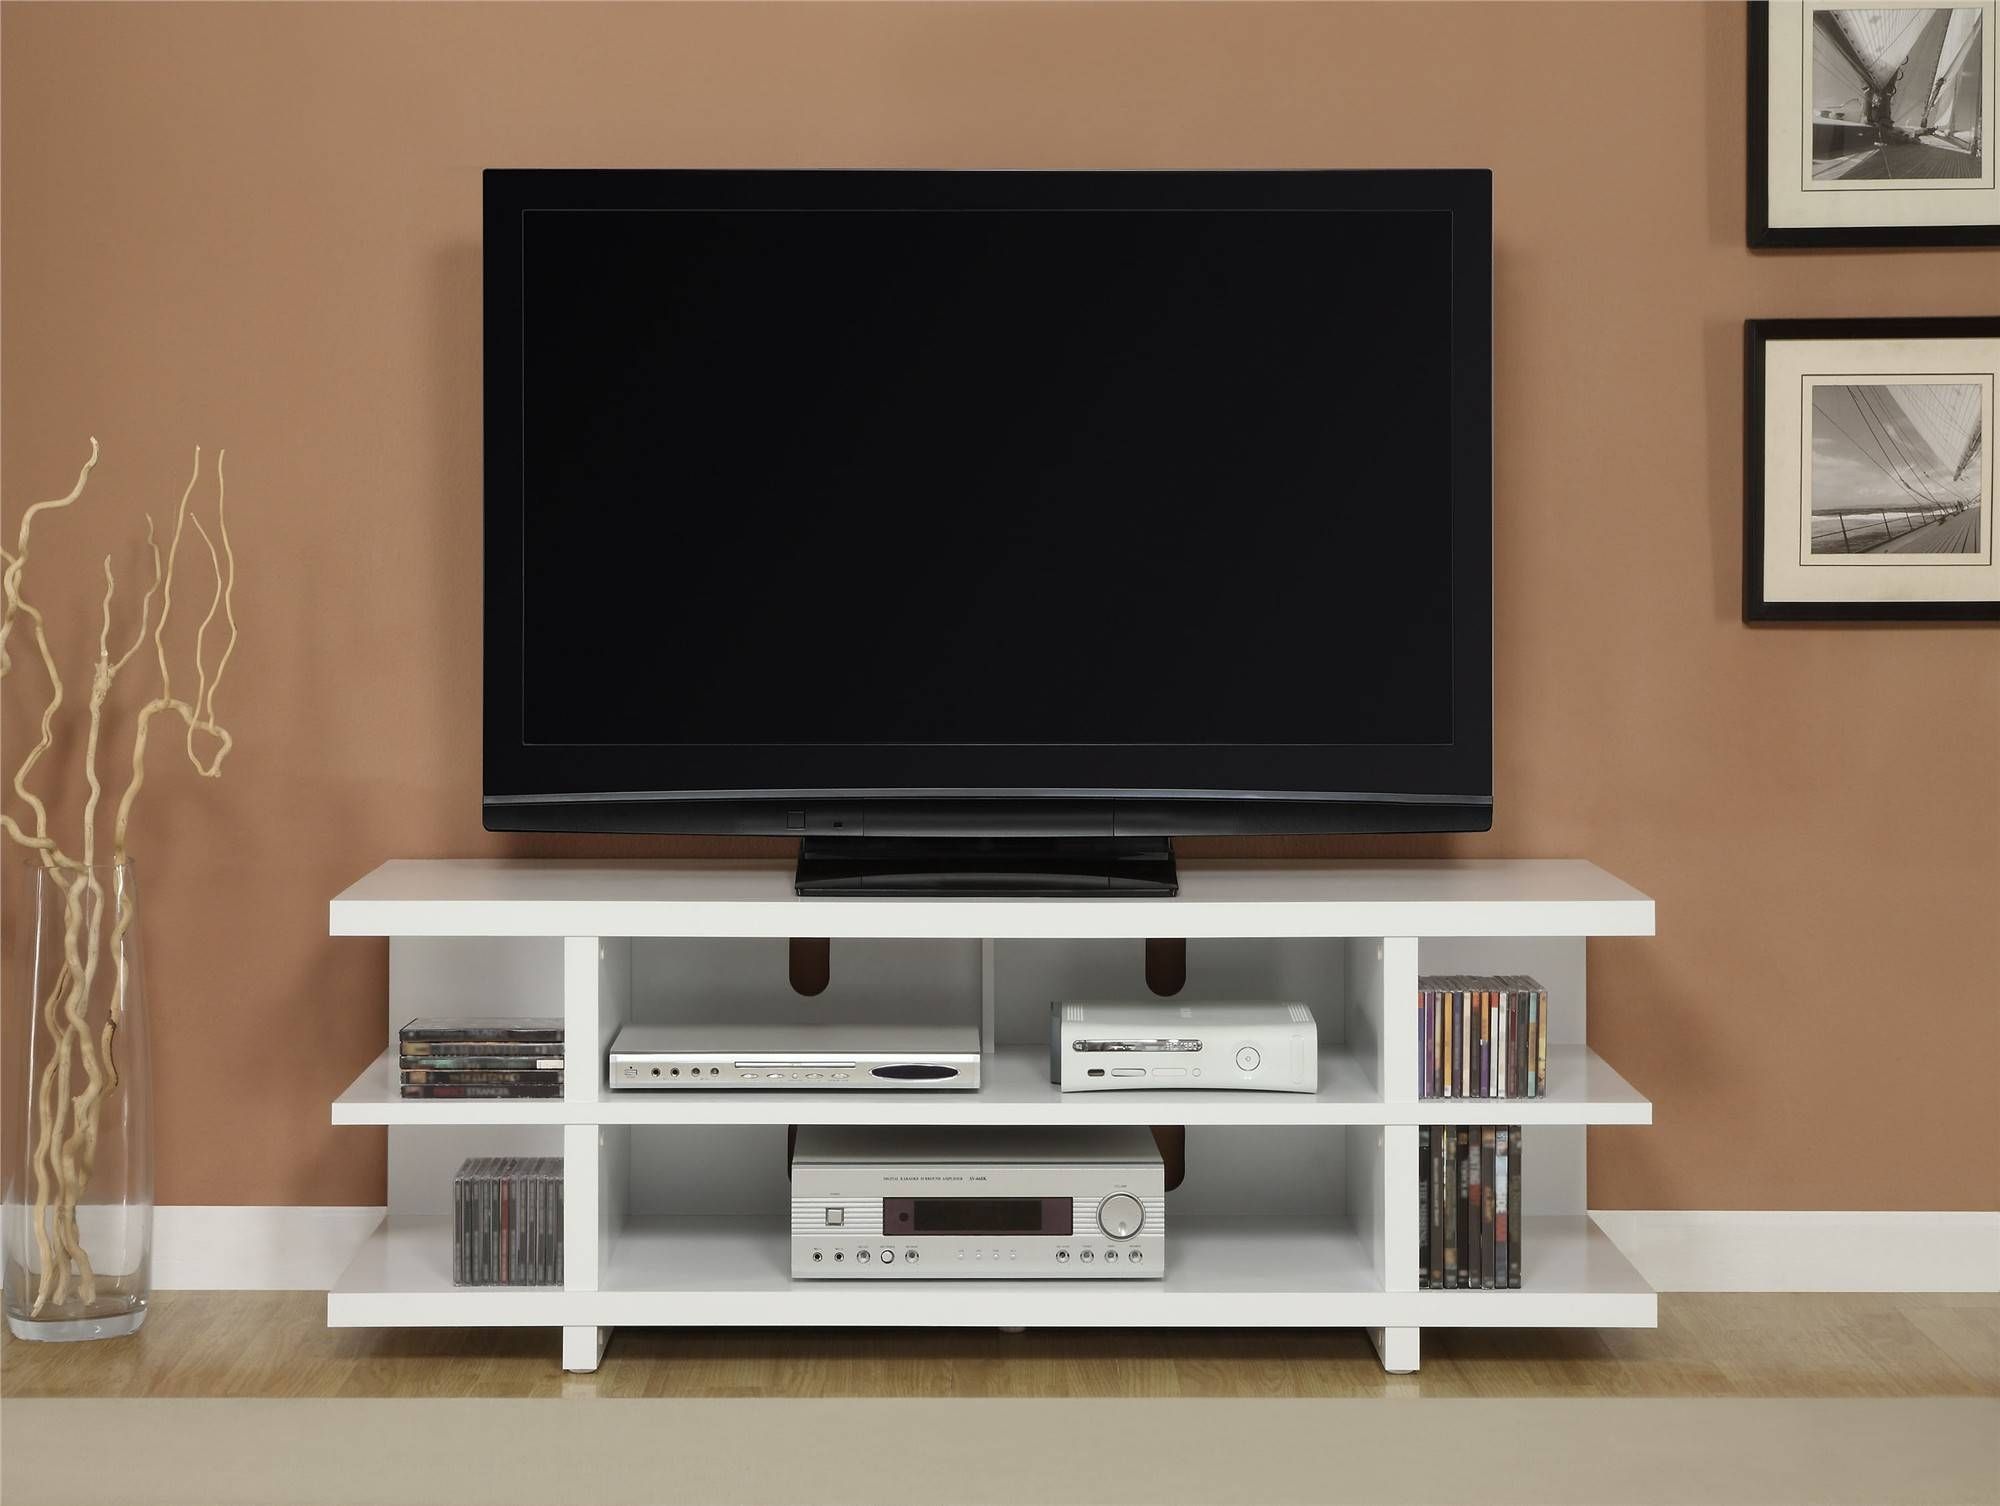 2018 Best Of Modern Tv Cabinets For Flat Screens